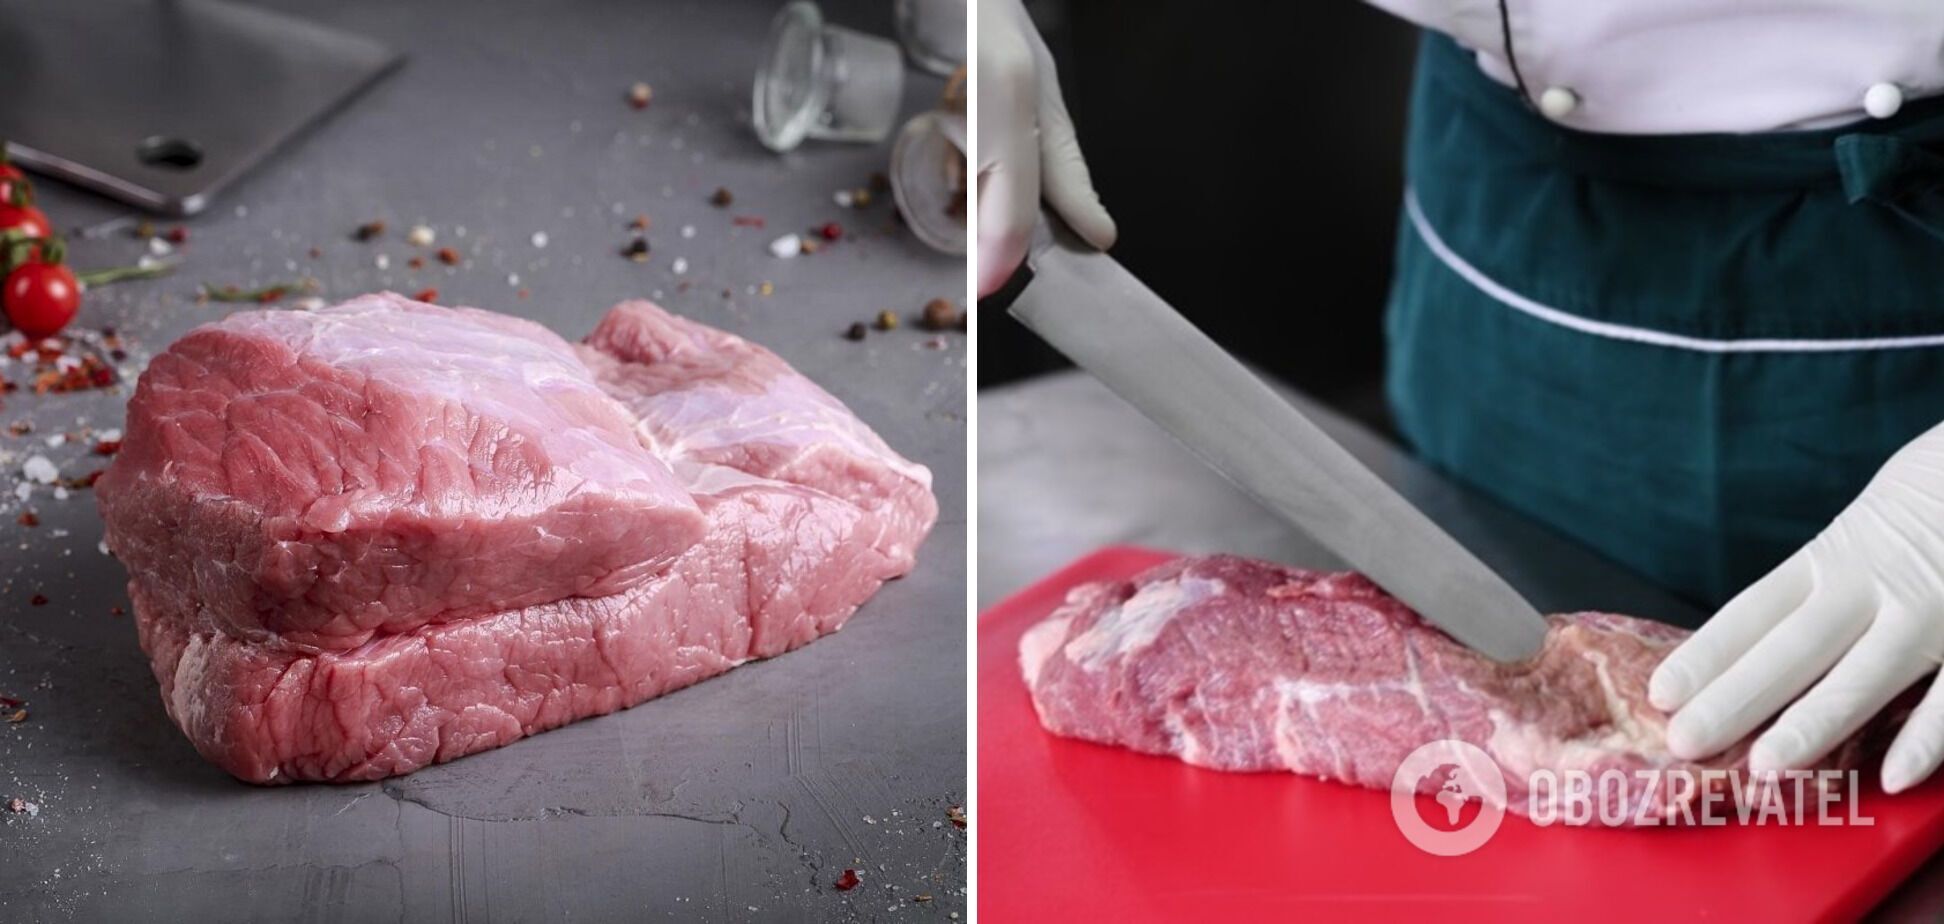 Do not defrost meat like this: the product will be very harmful